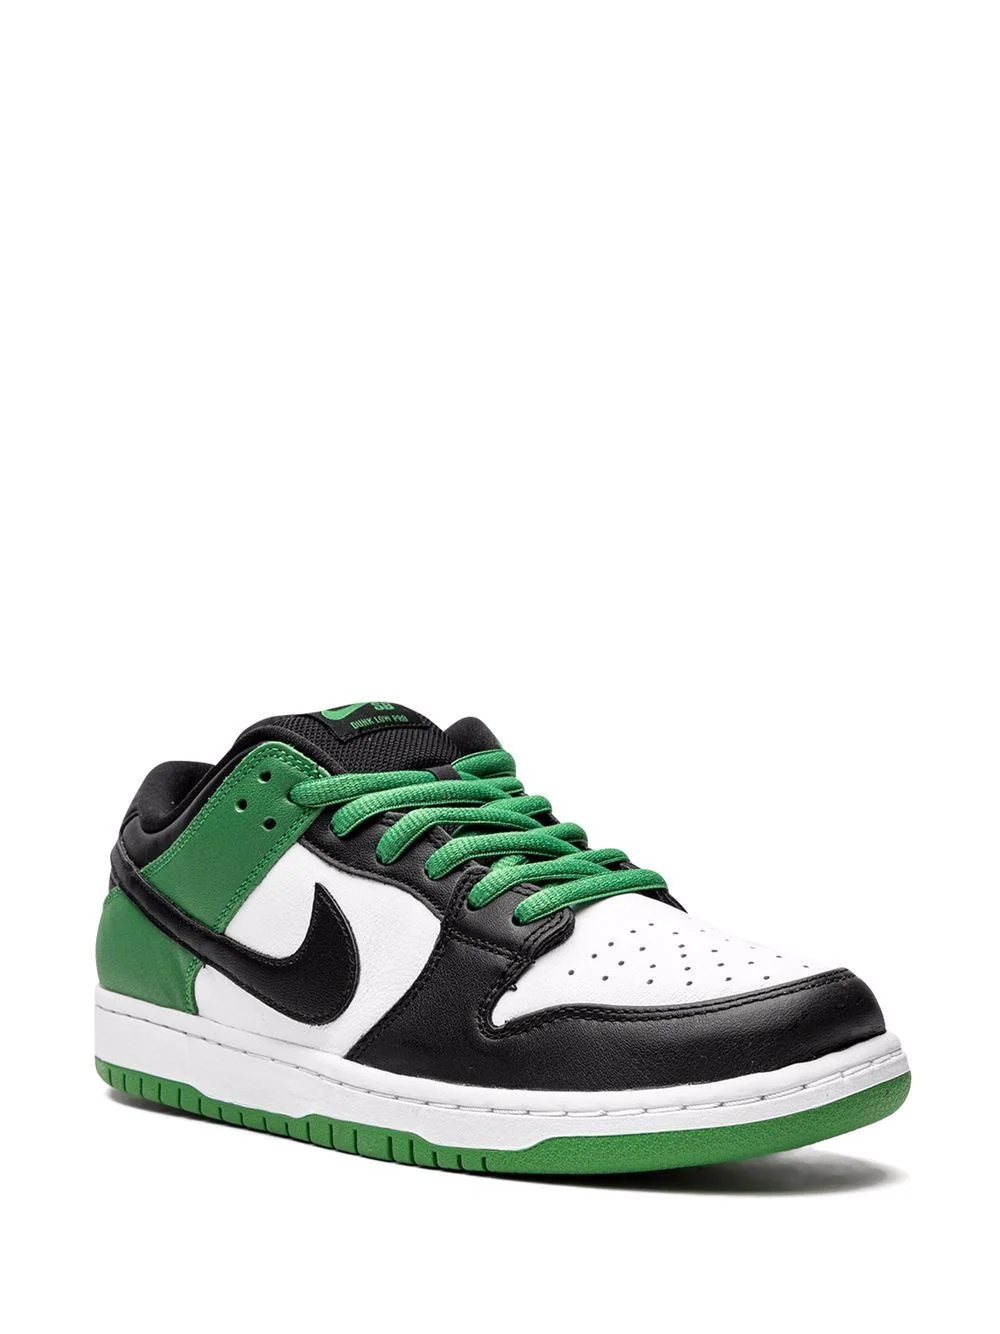 Dunk Low Pro SB "Classic Green" sneakers - 2